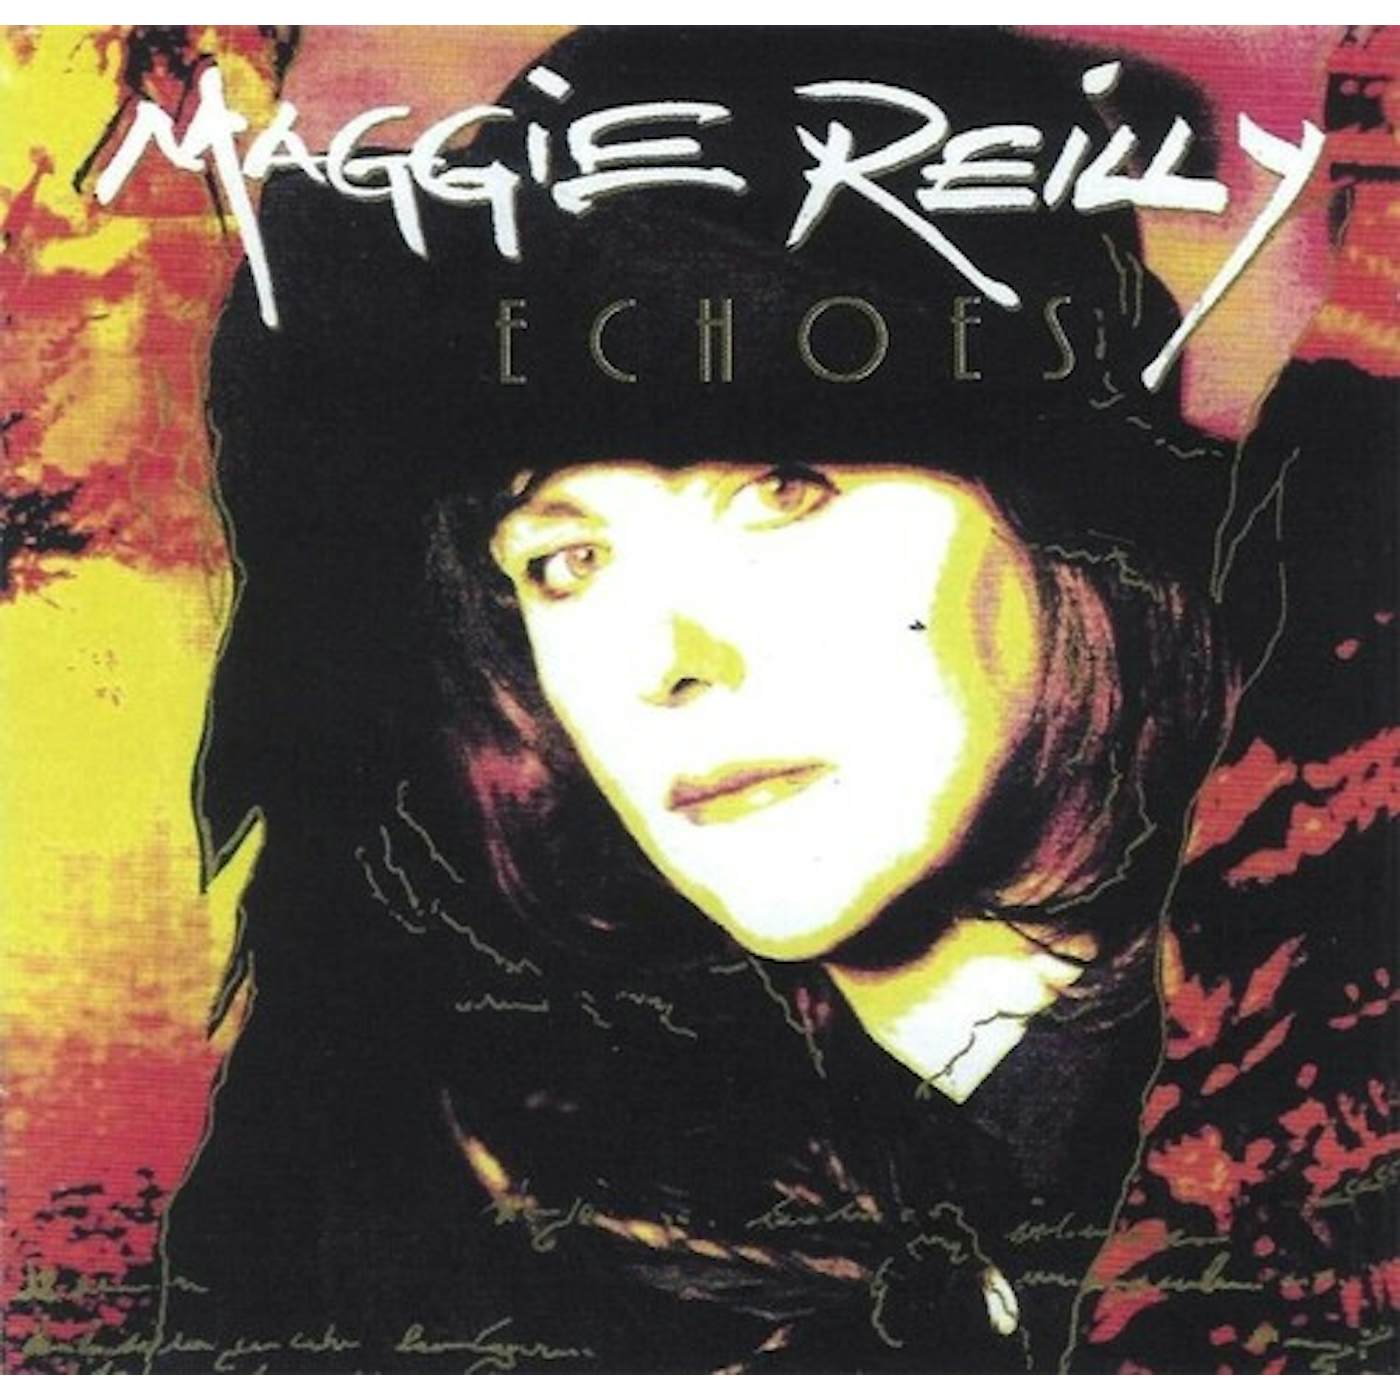 Maggie Reilly ECHOES (DELUXE EDITION) CD